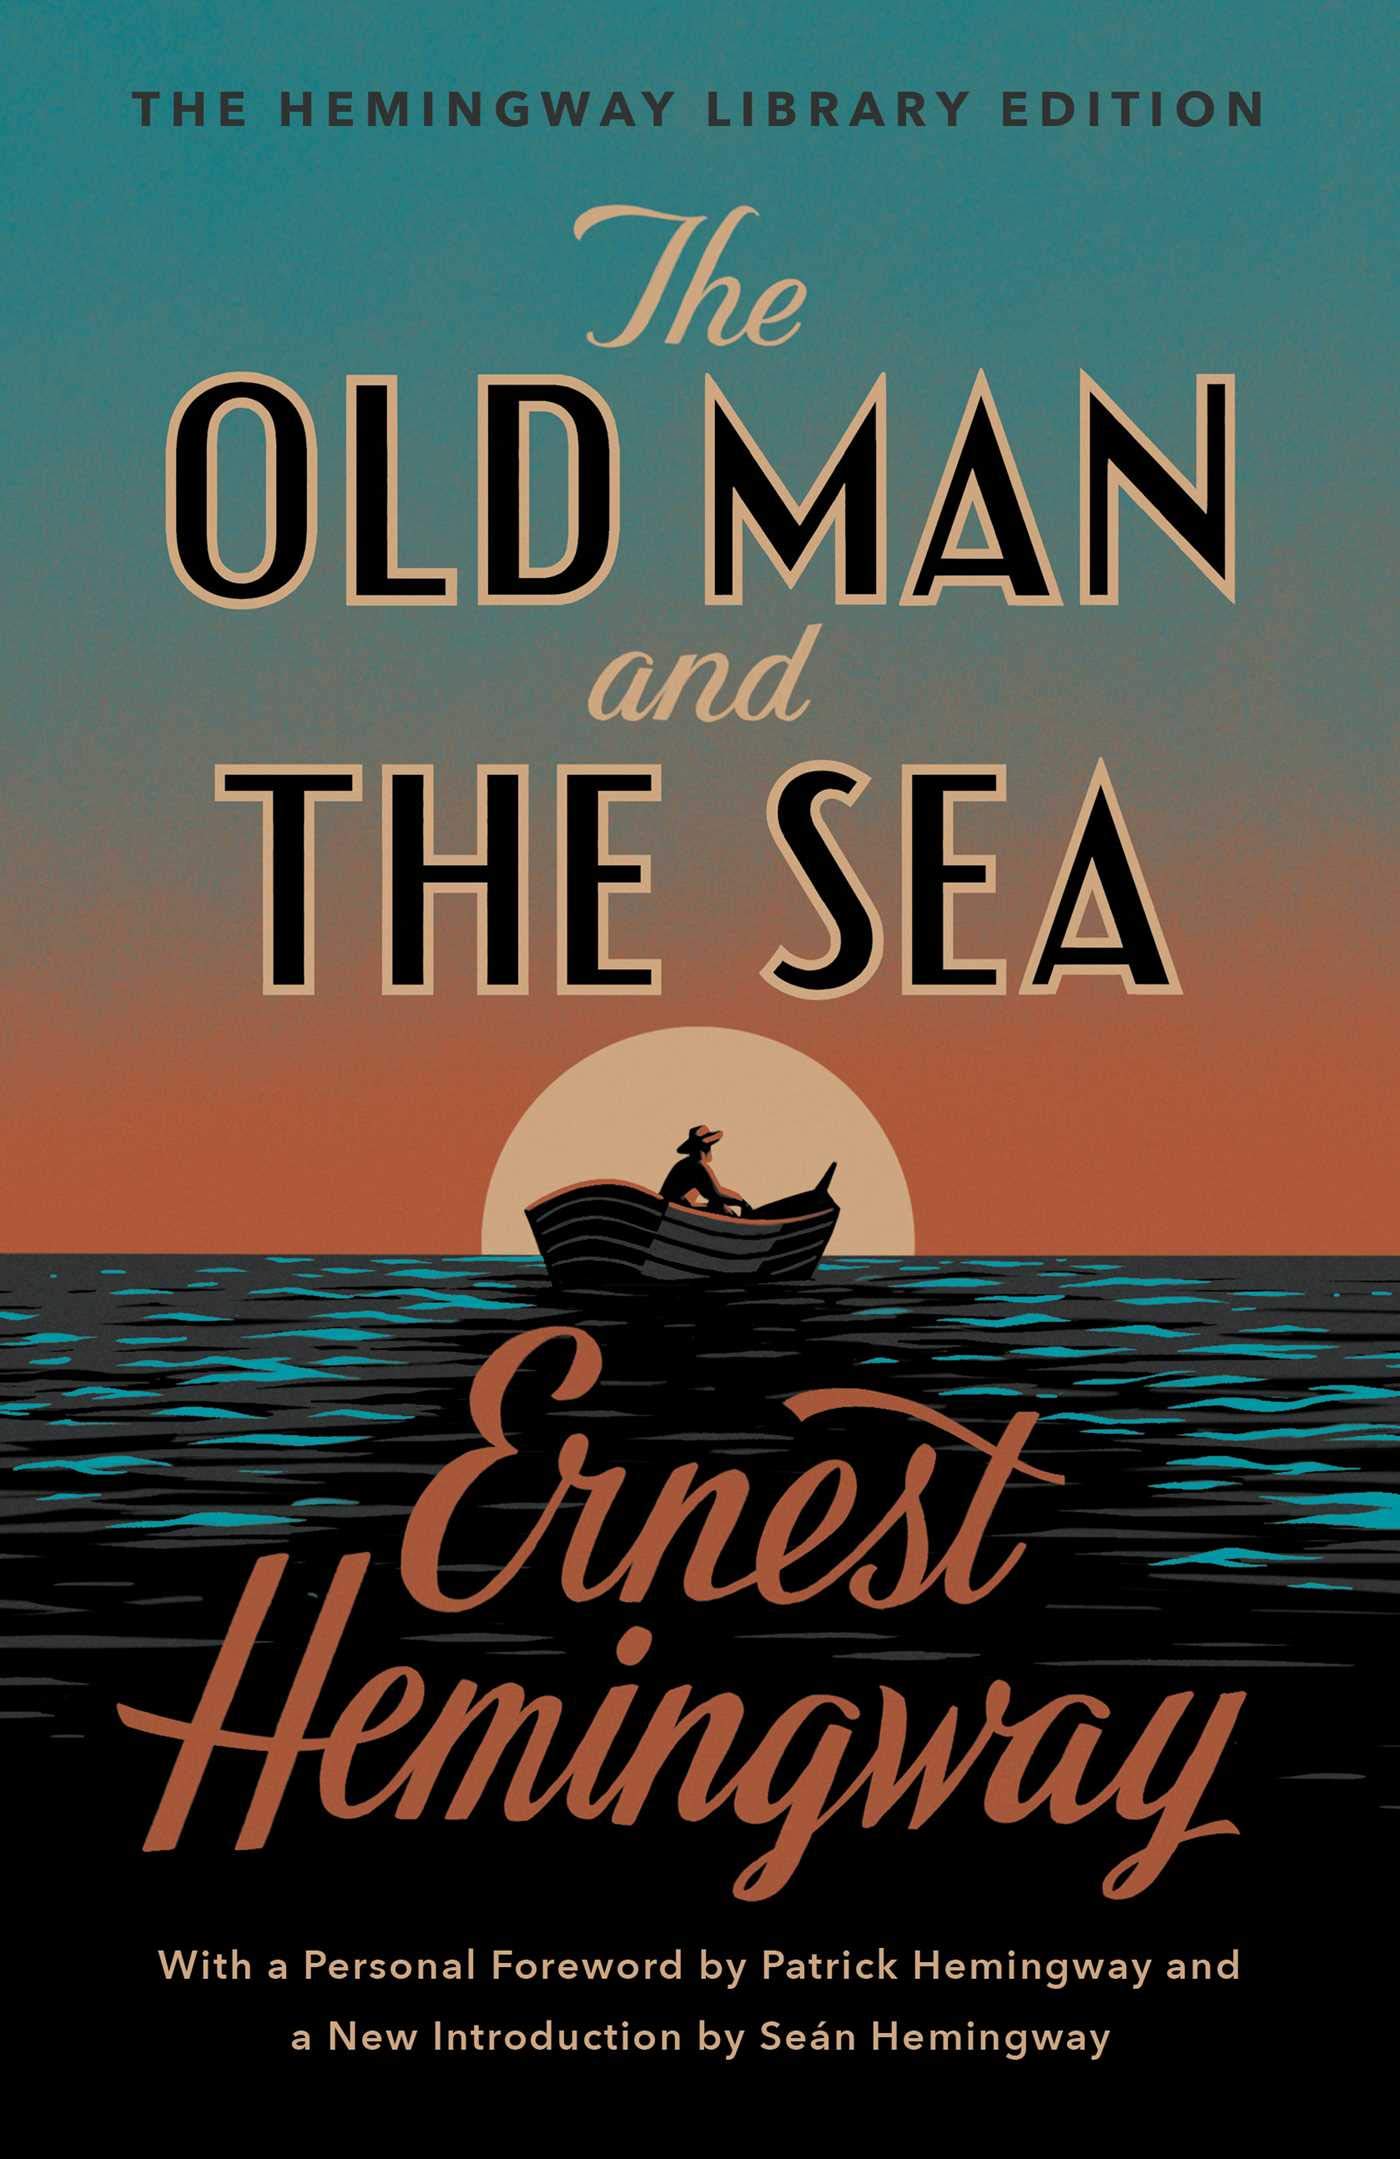 'The Old Man and the Sea' by Ernest Hemingway